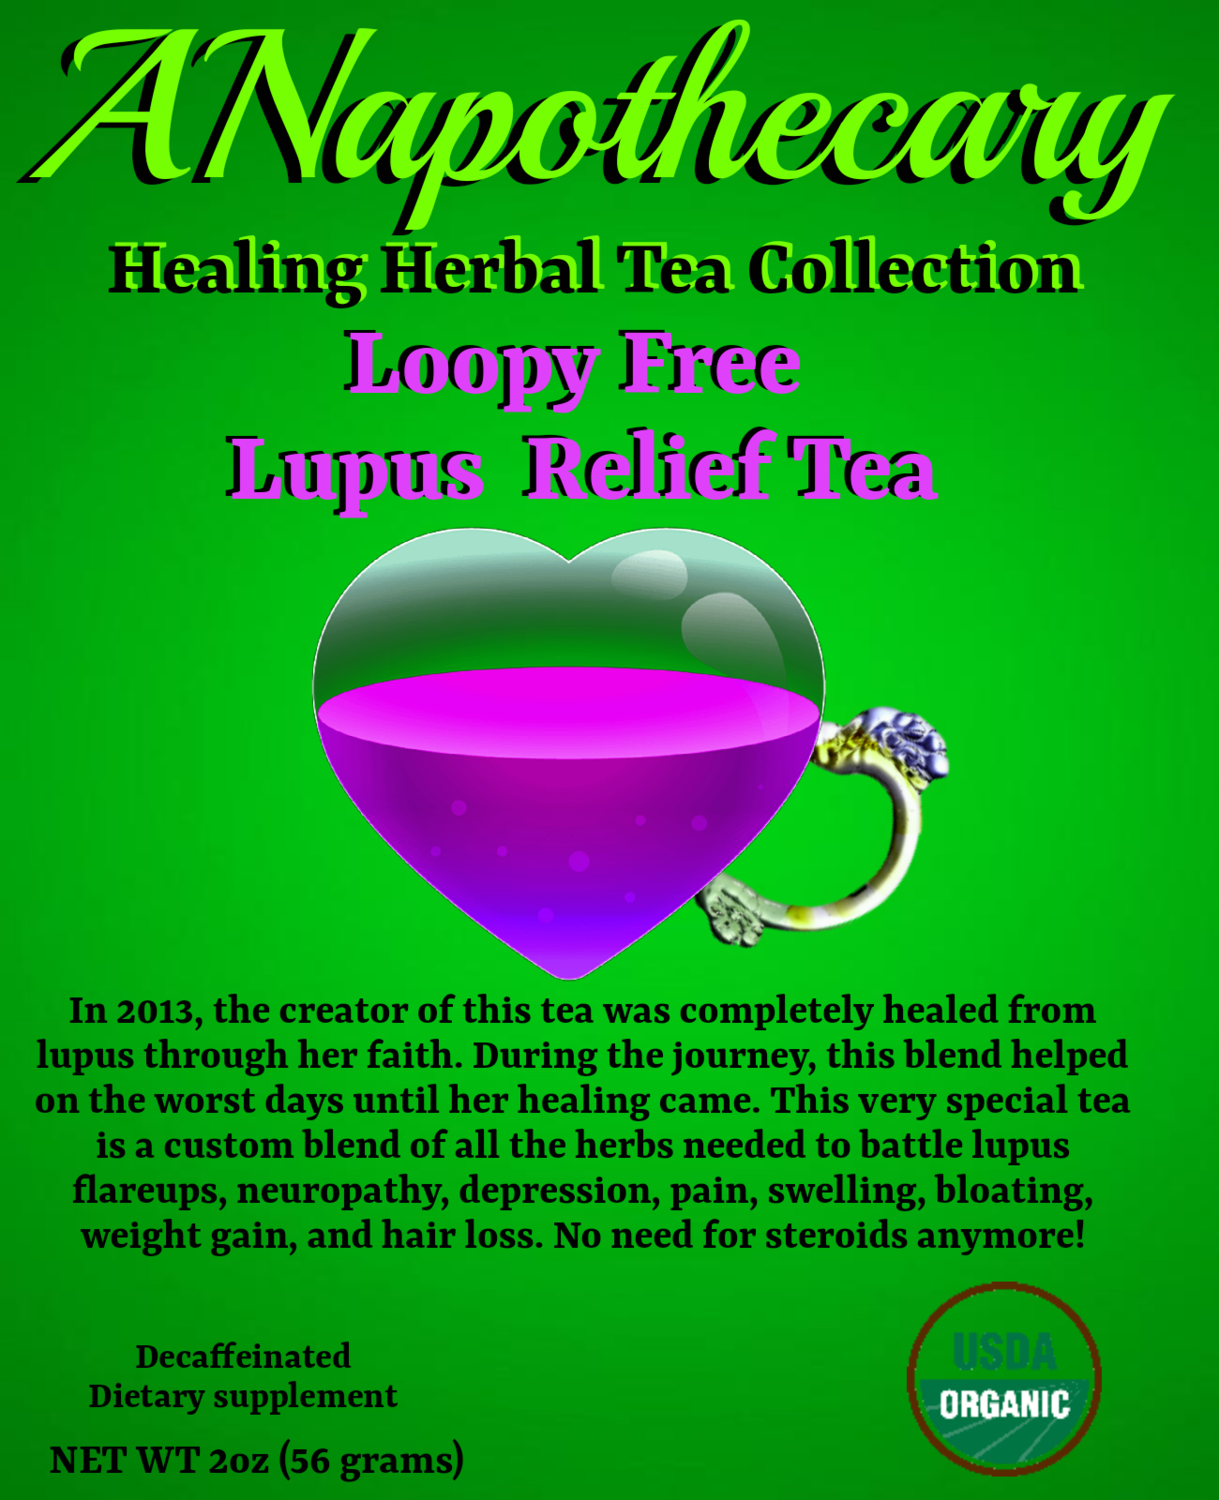 Loopy Free Lupus Relief Tea